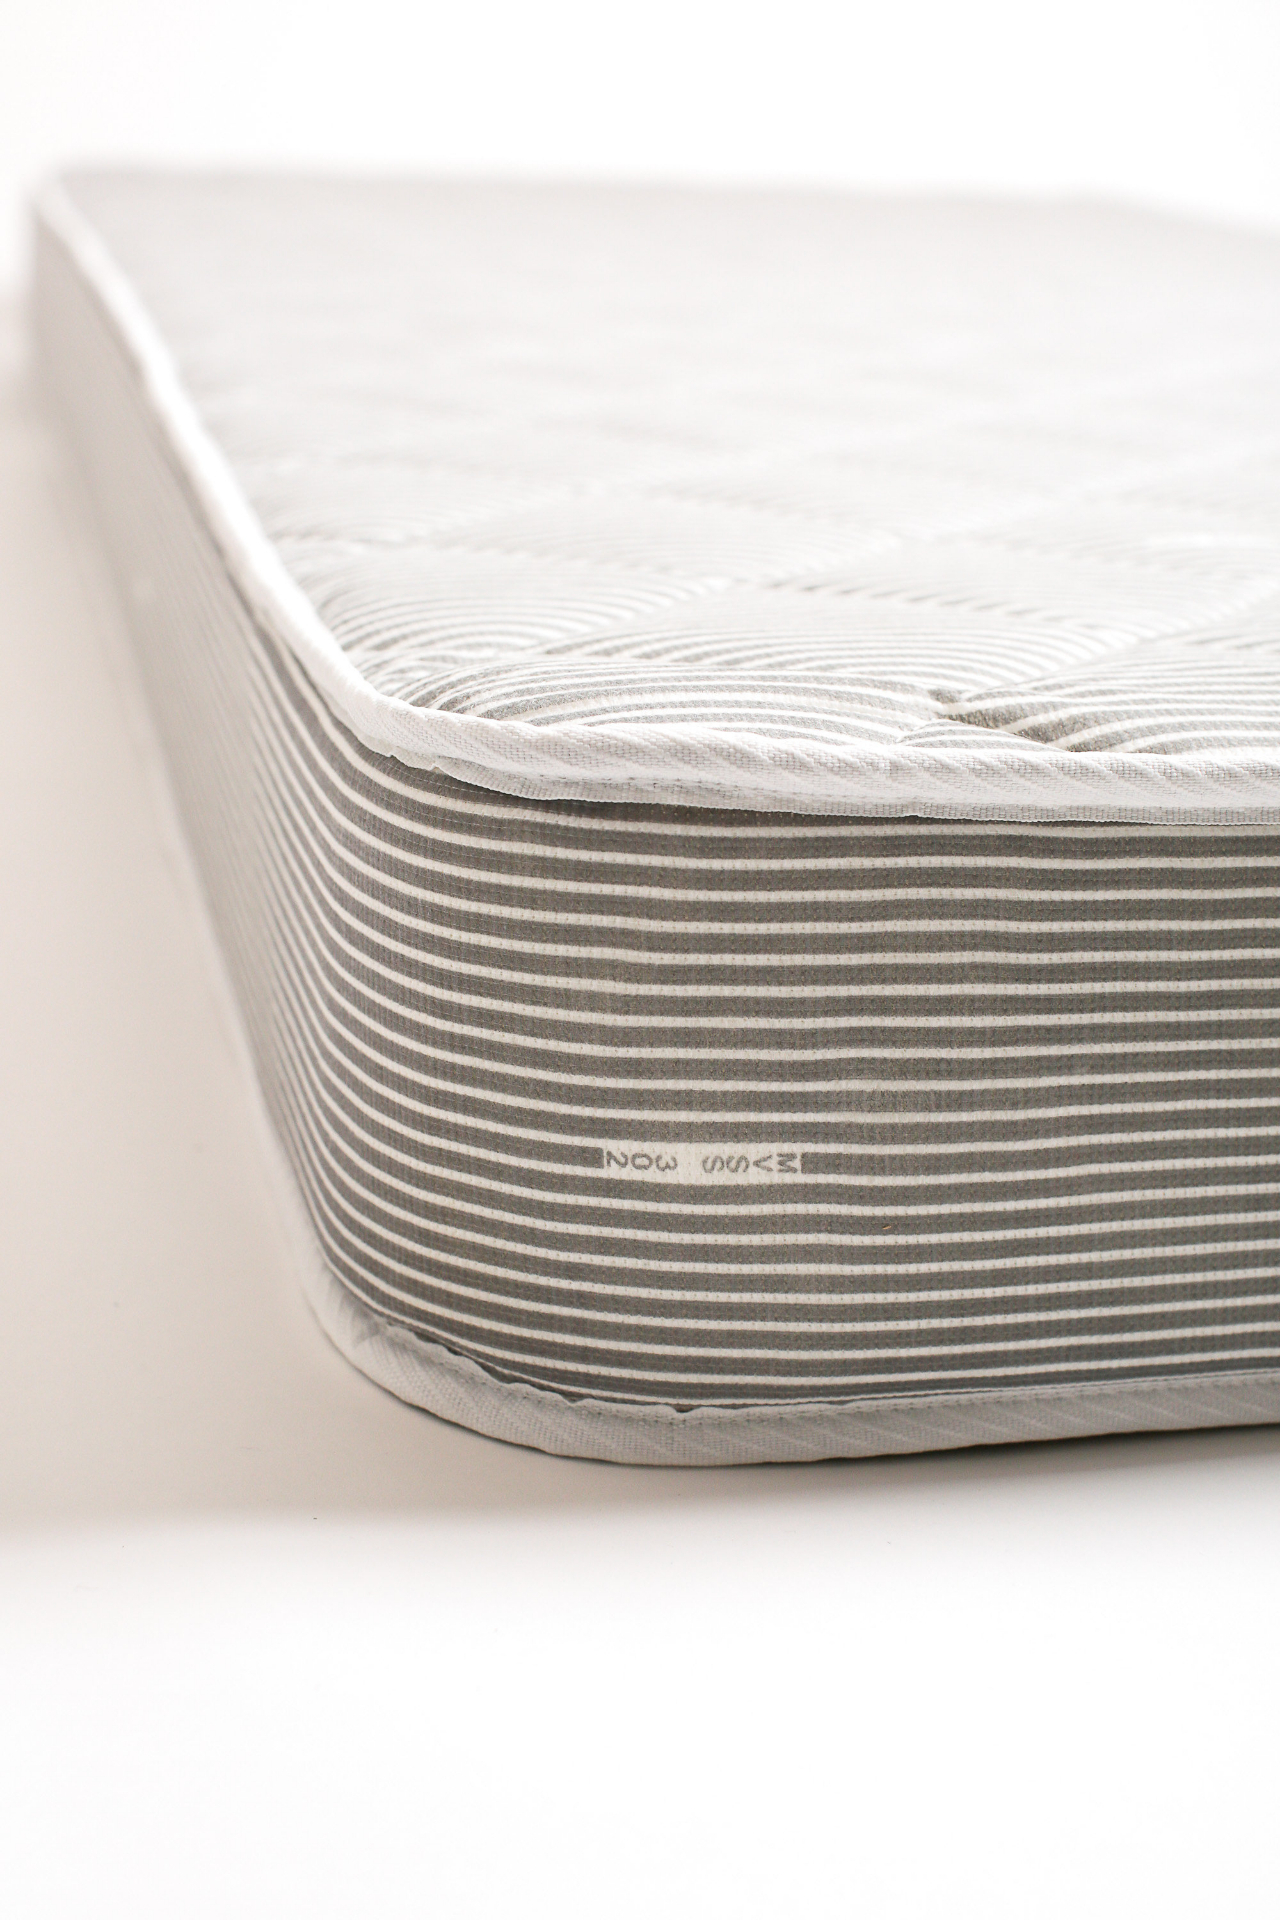 The double-sided, quilted cover adds an extra layer of cushion for a better nights rest.